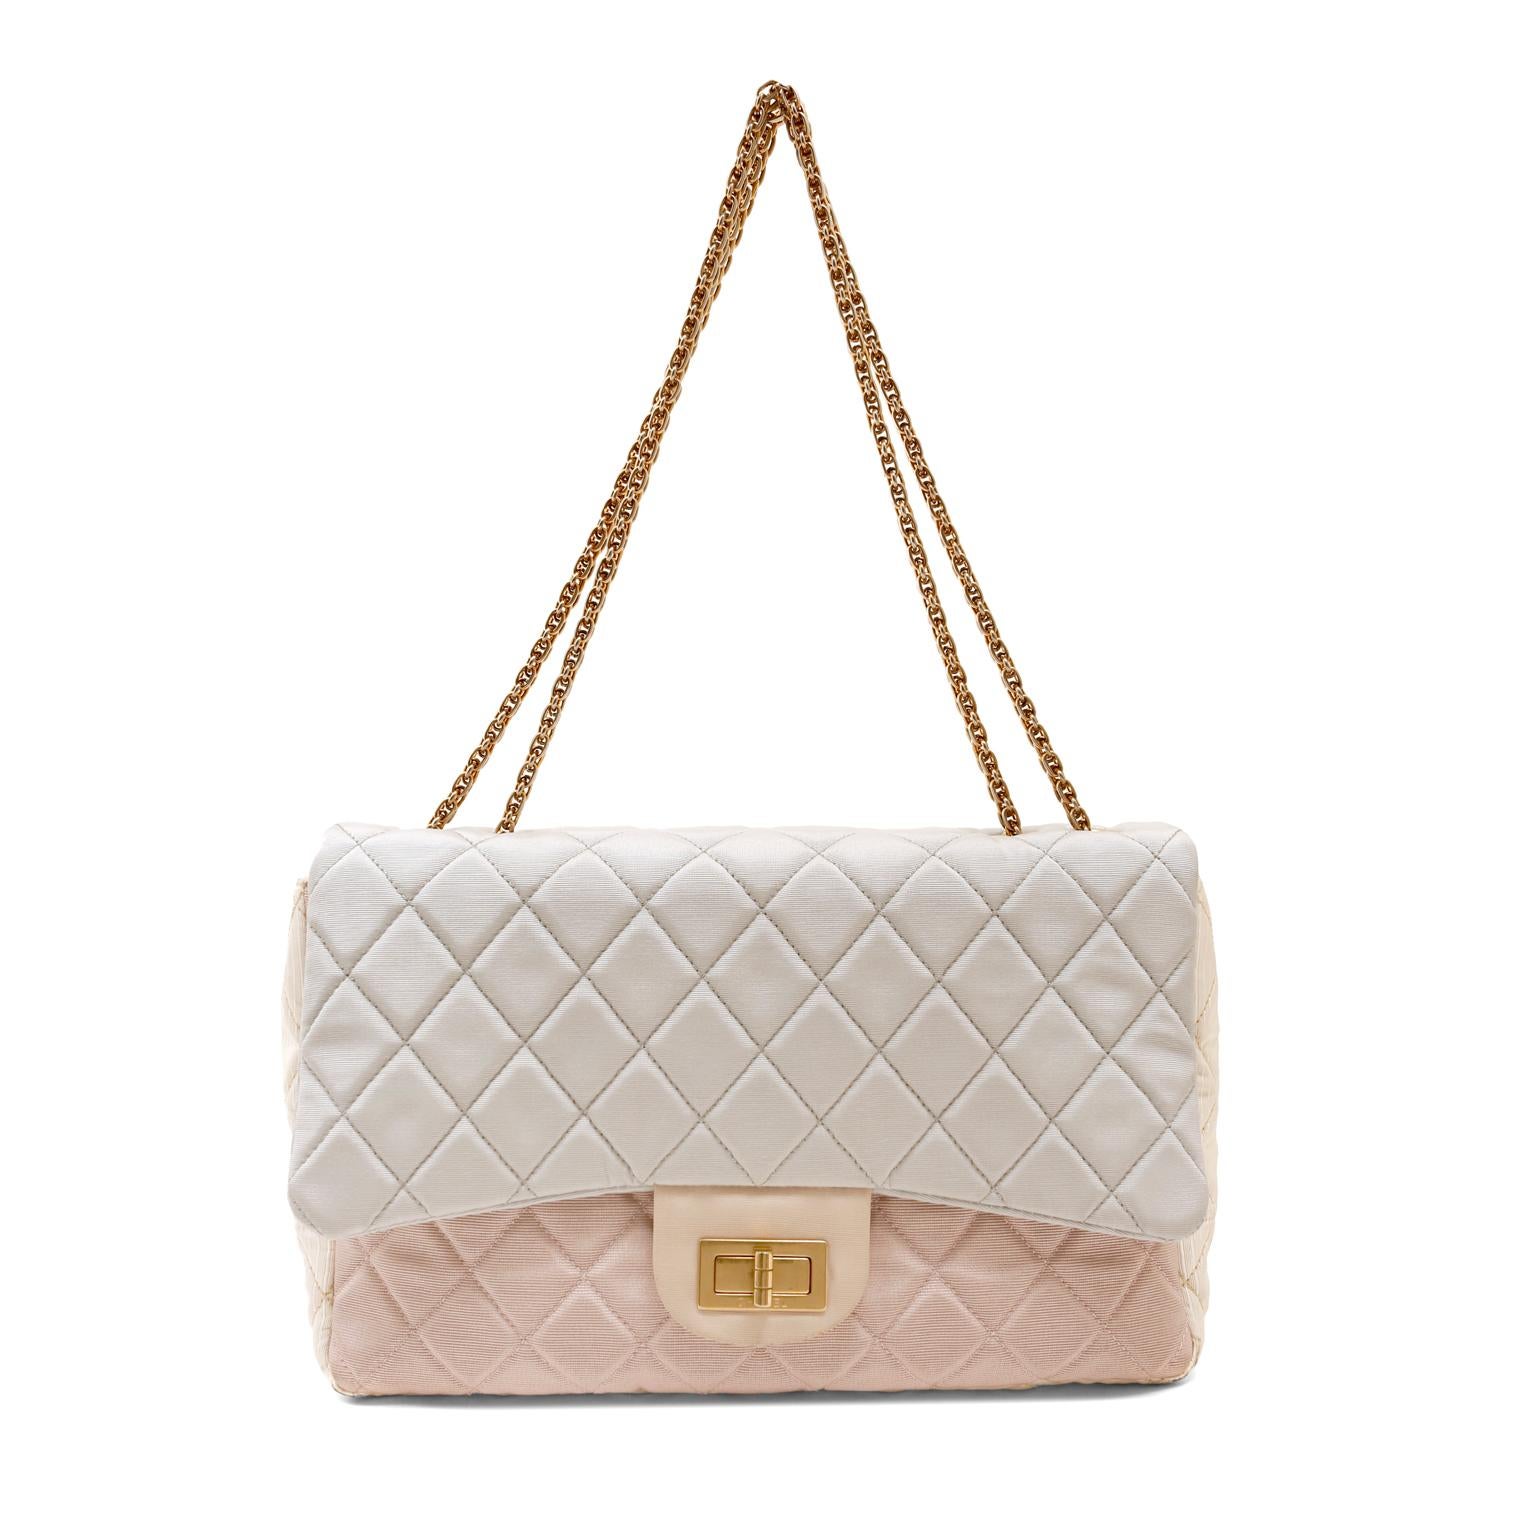 Chanel Pastel Tricolor Fabric Reissue Flap Bag  In Good Condition For Sale In Palm Beach, FL